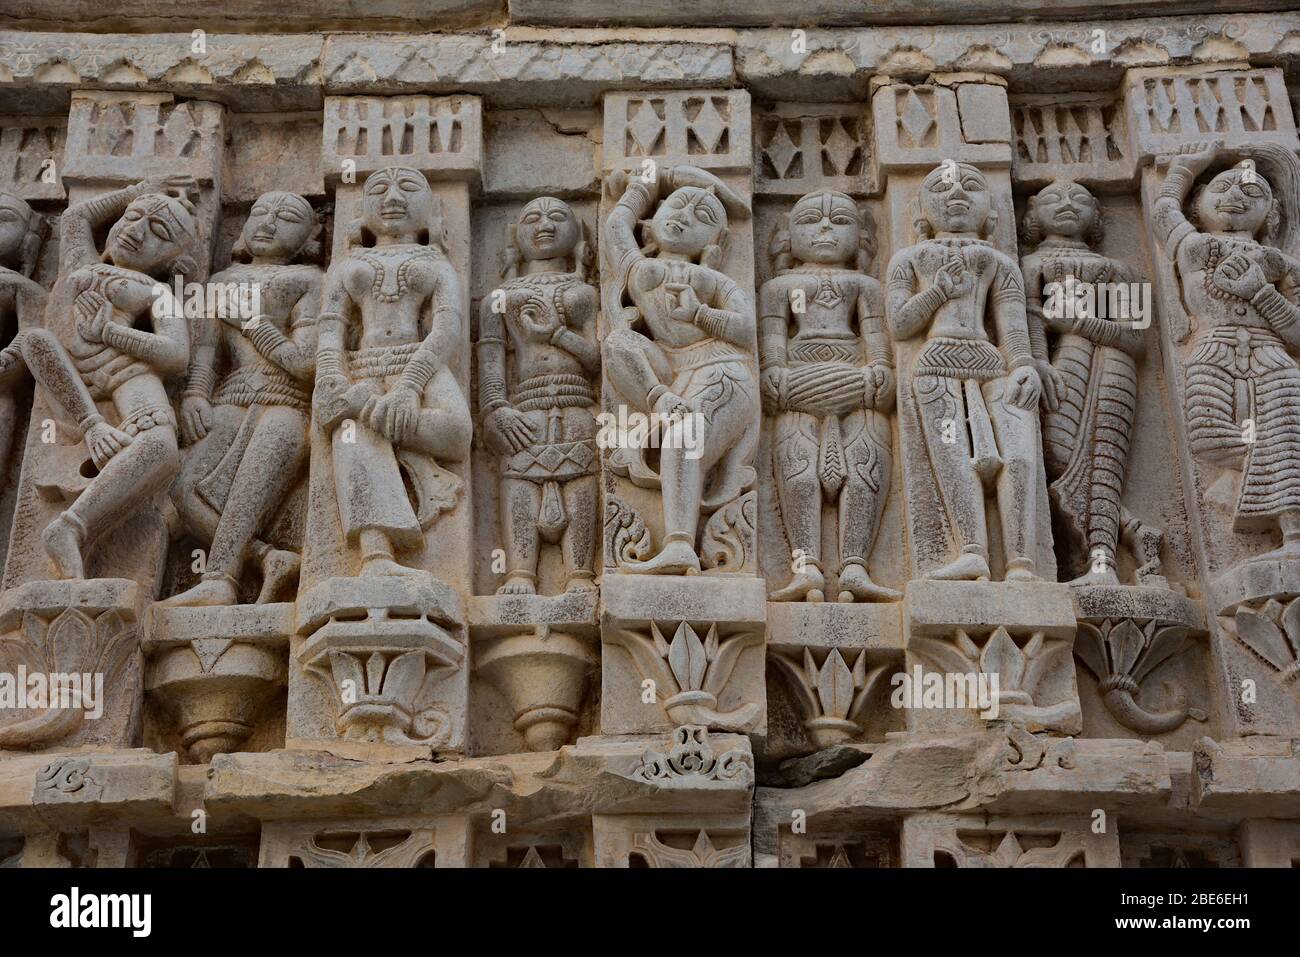 Elaborate details of female dancers carved into the exterior of the 17th century Jagdish temple of Vishnu, Udaipur, India, Asia. Stock Photo